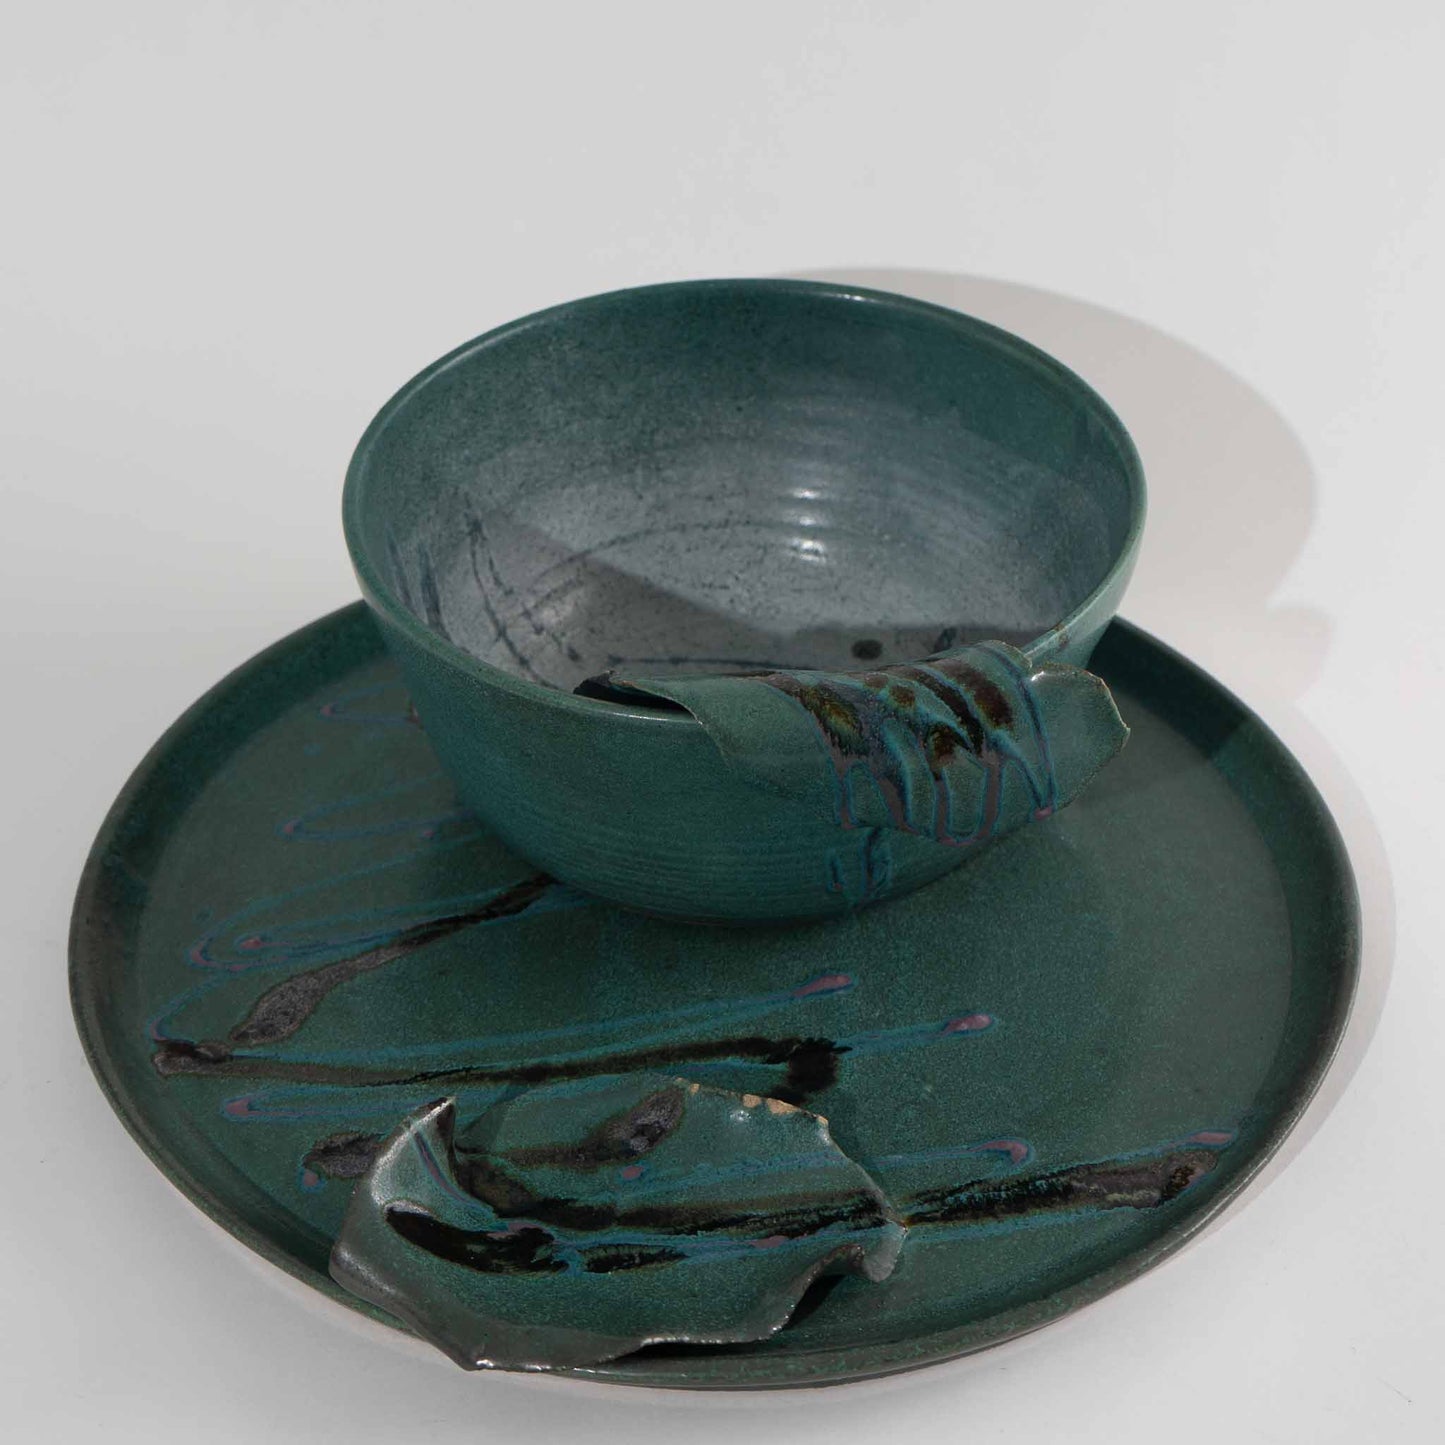 Vintage Abstract Studio Pottery Bowl and Plate - Set of 2 - teal and green - artist made